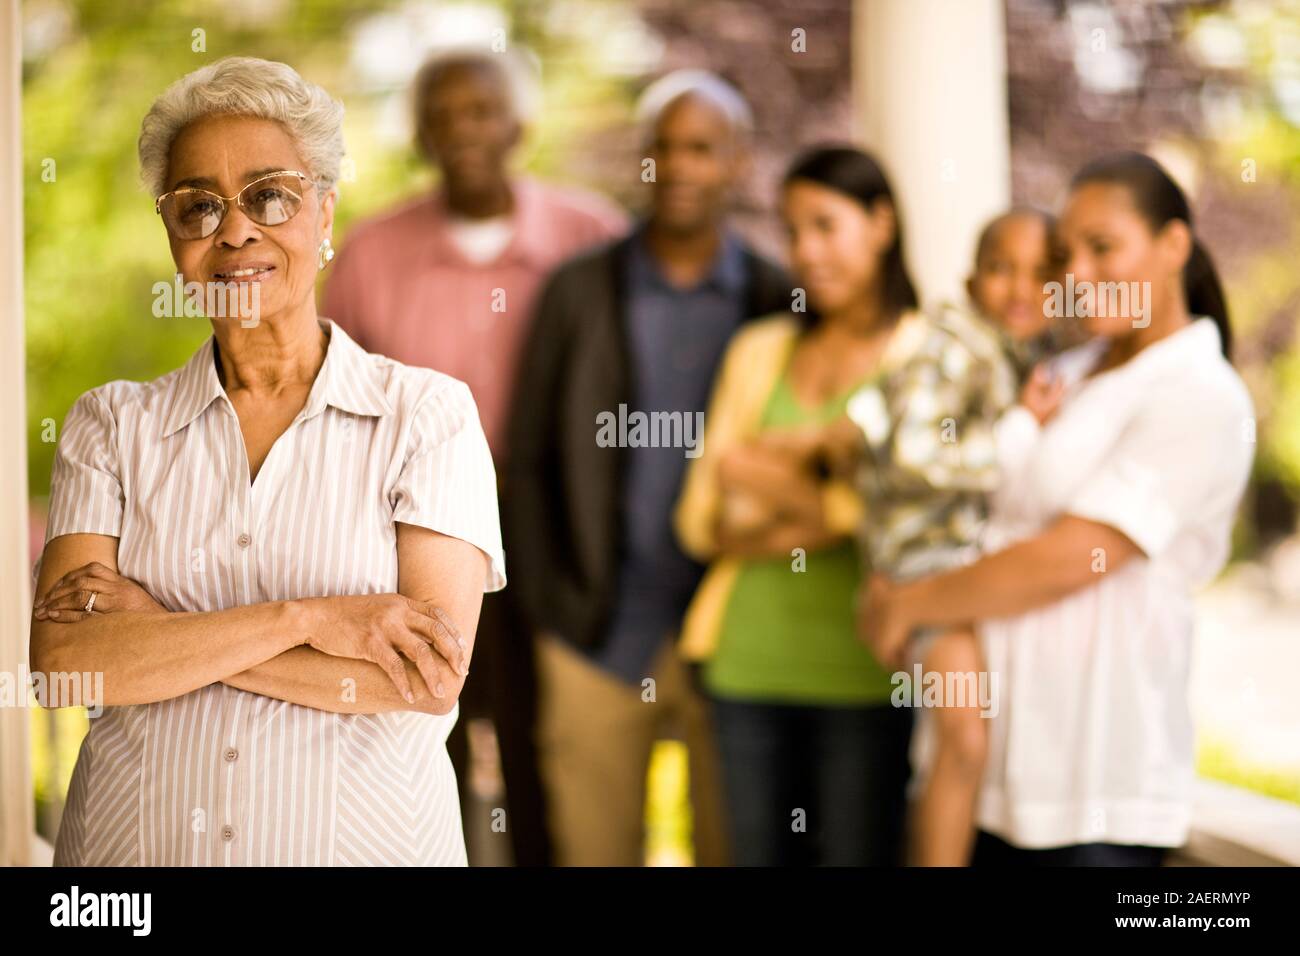 Smiling senior woman poses proudly for a portrait with her family behind her. Stock Photo